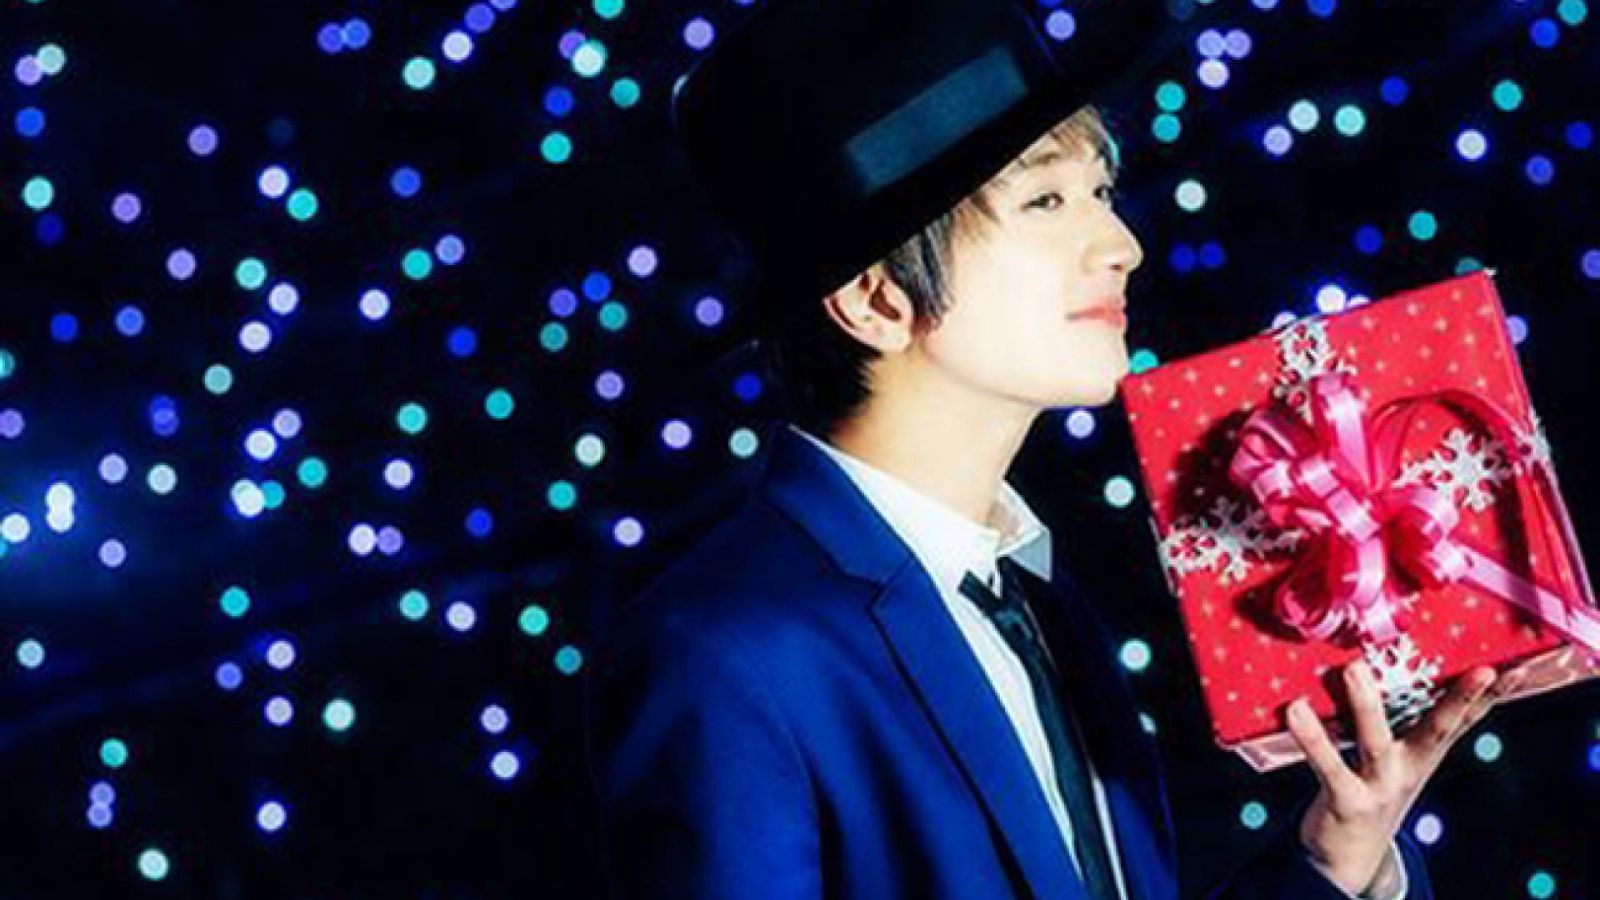 Primeiro álbum solo de Nissy © avex management. All rights reserved.